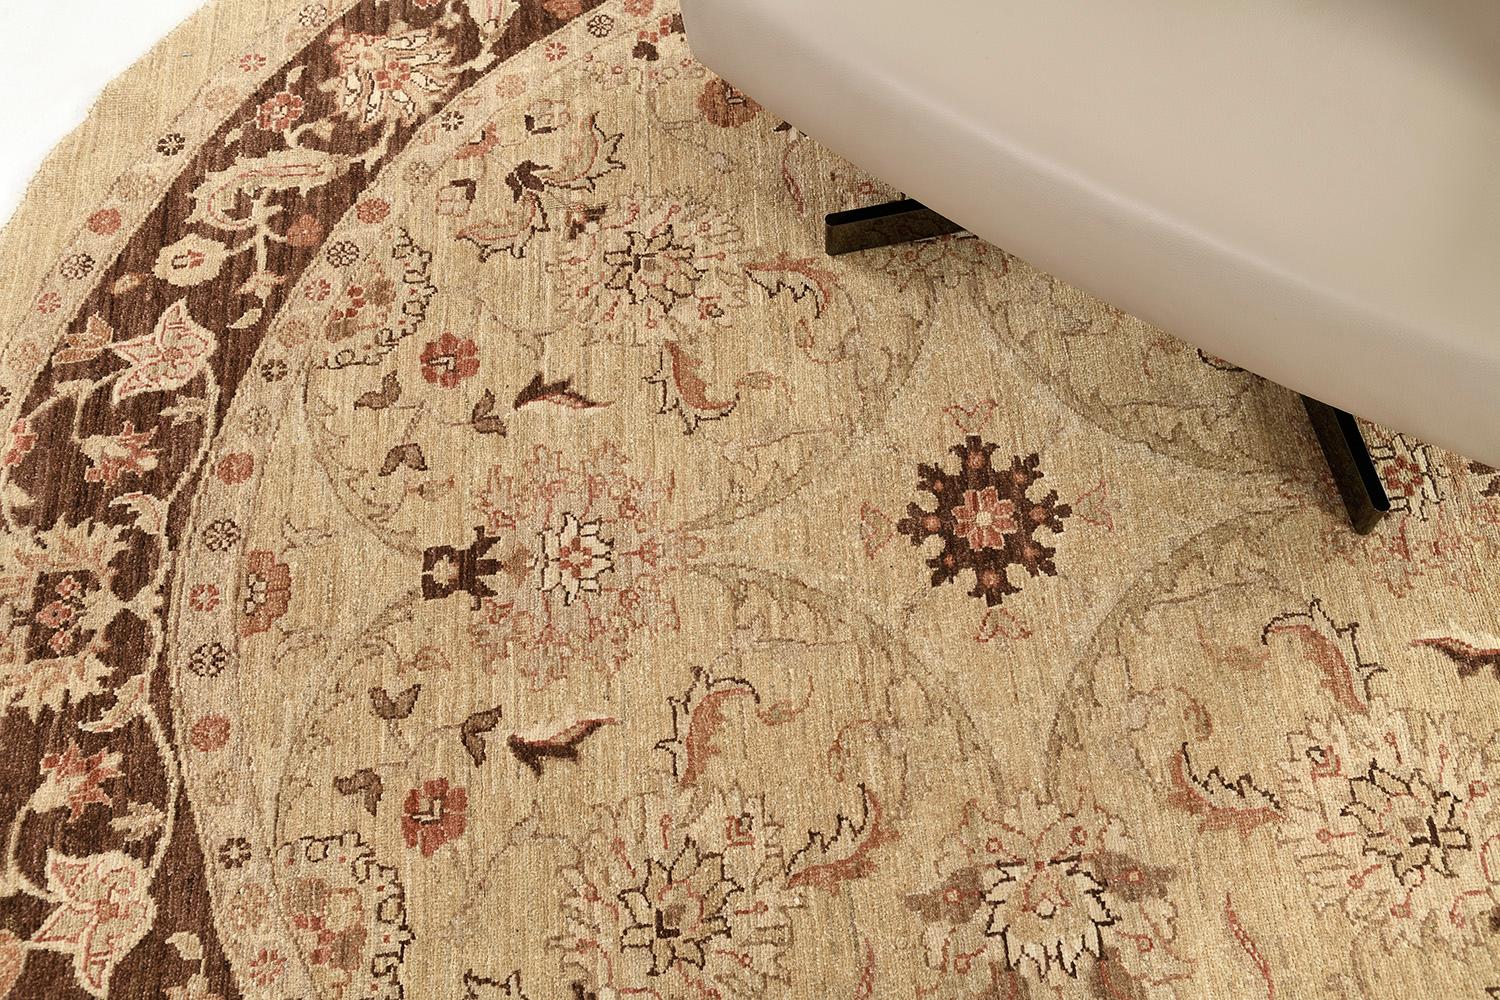 Series of magical vines and florid ornaments are reflected through golden embellishments to blooming and calming warm fields. The borders are beautifully hand-woven that created from a vegetable dye to form an elegant Sultanabad Round Rug. Truly a